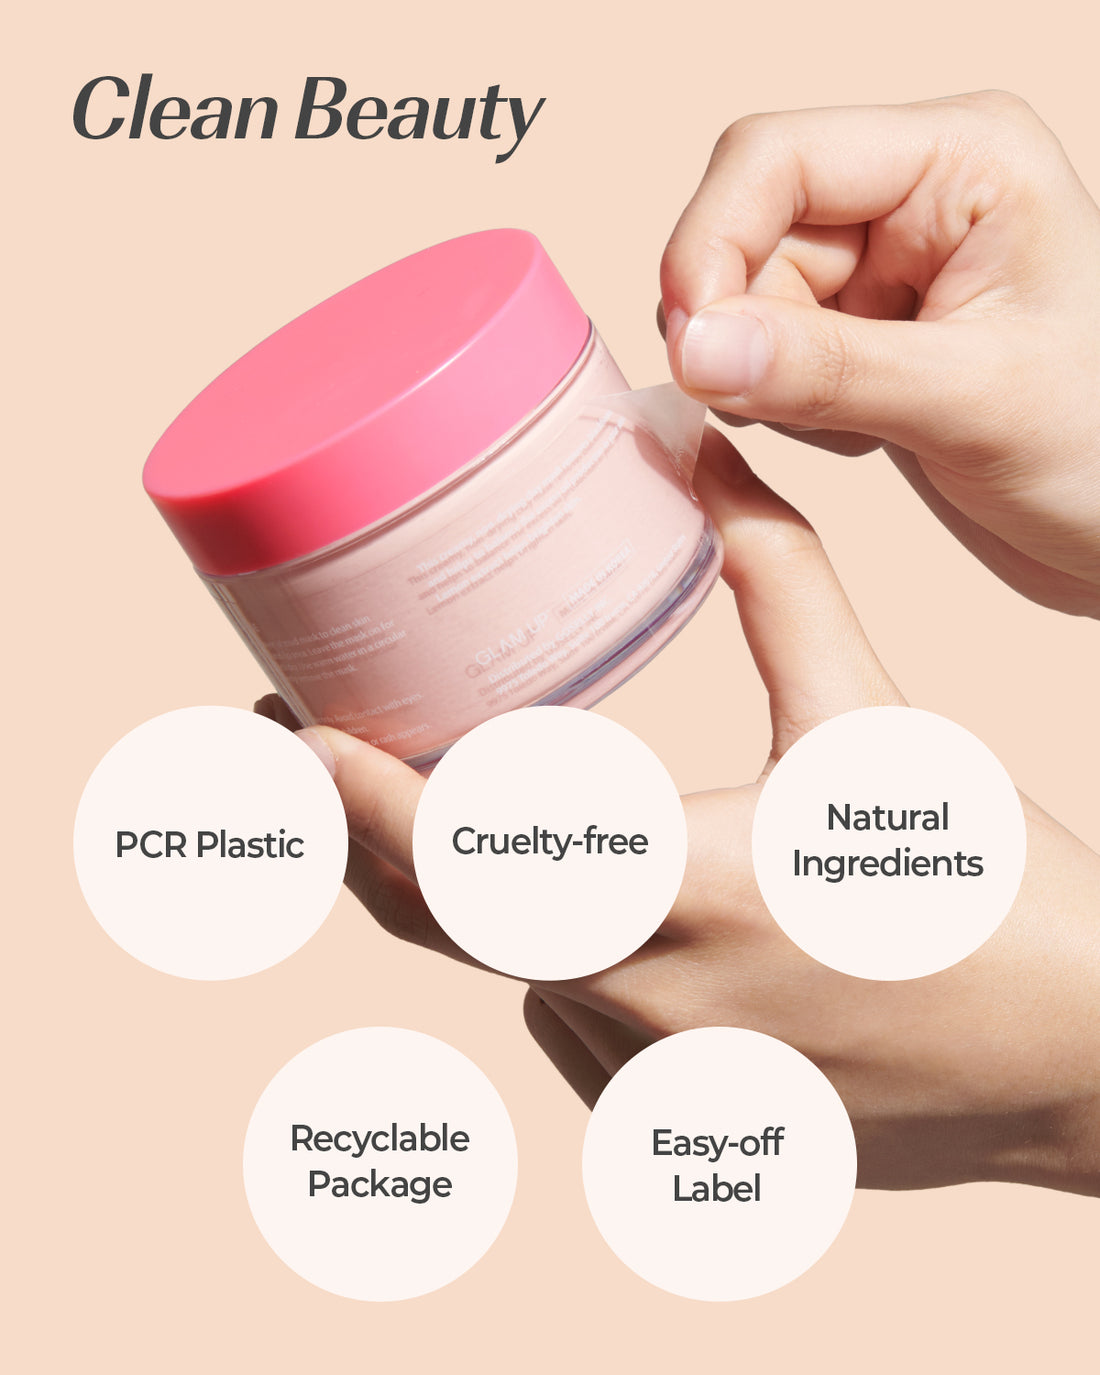 PCR plastic, cruelty free, natural ingredients, recyclable package, easy off label